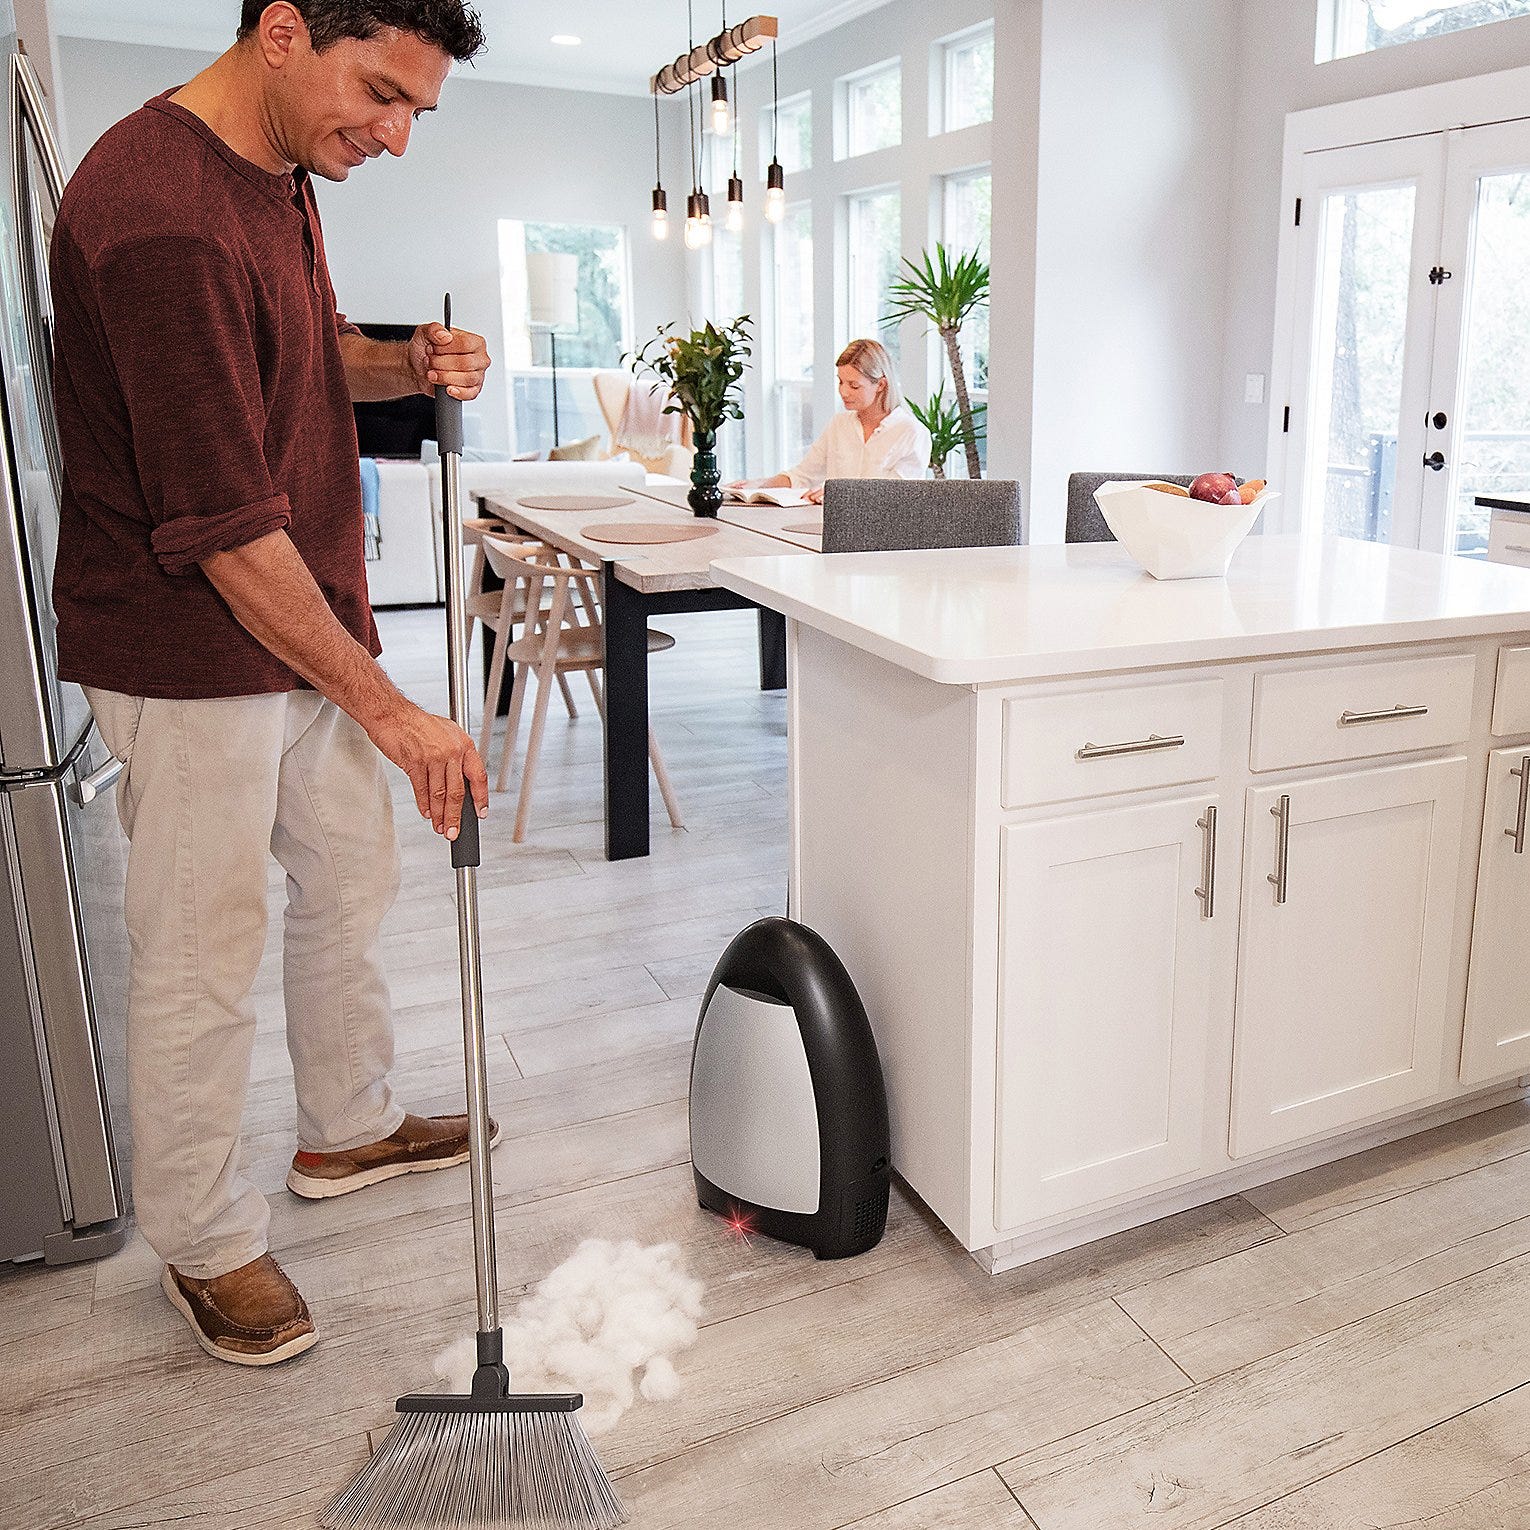 A man sweeps debris into a stationary vacuum device in a kitchen while a woman works at a table in the background.